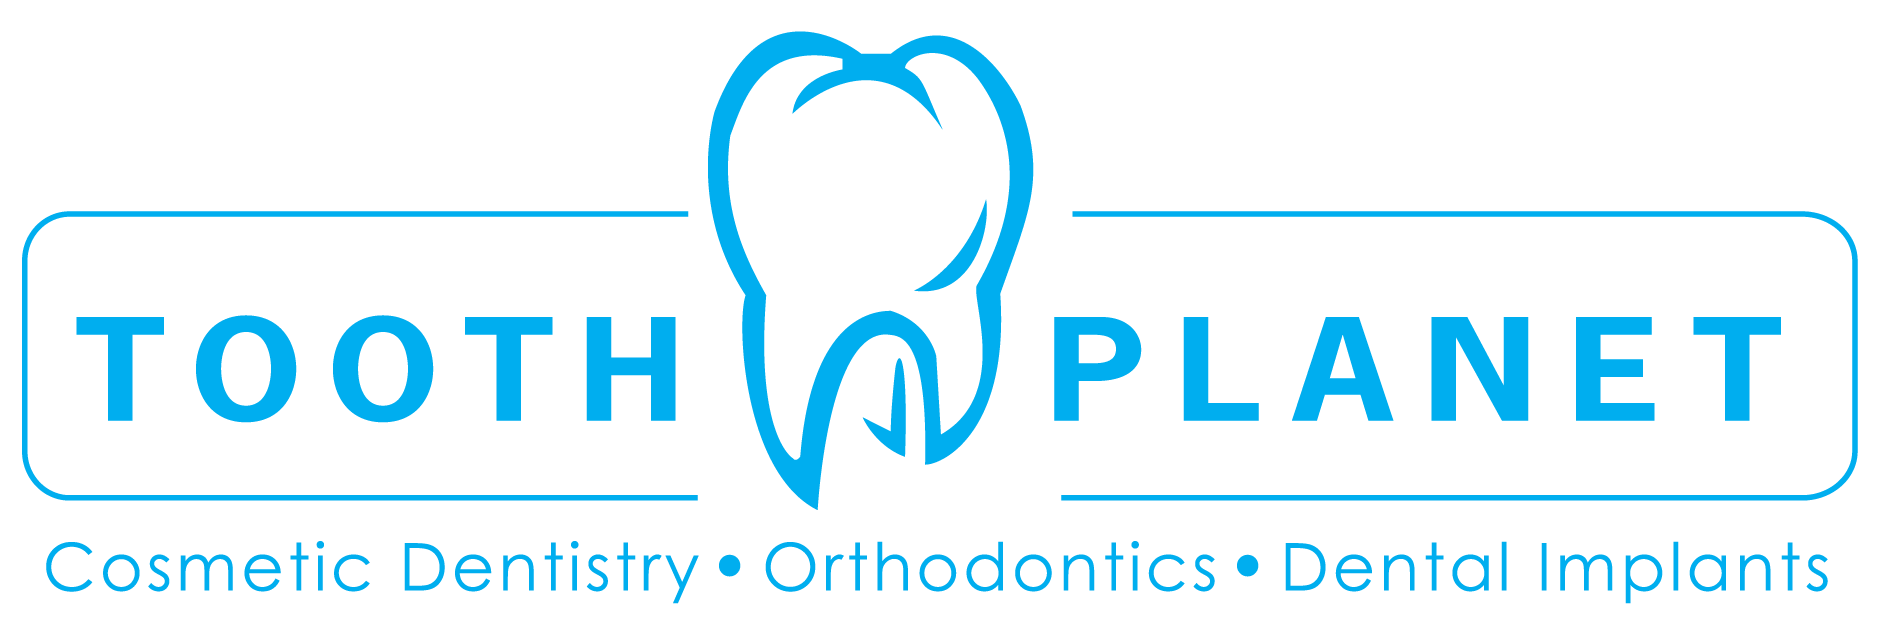 Tooth Planet Logo